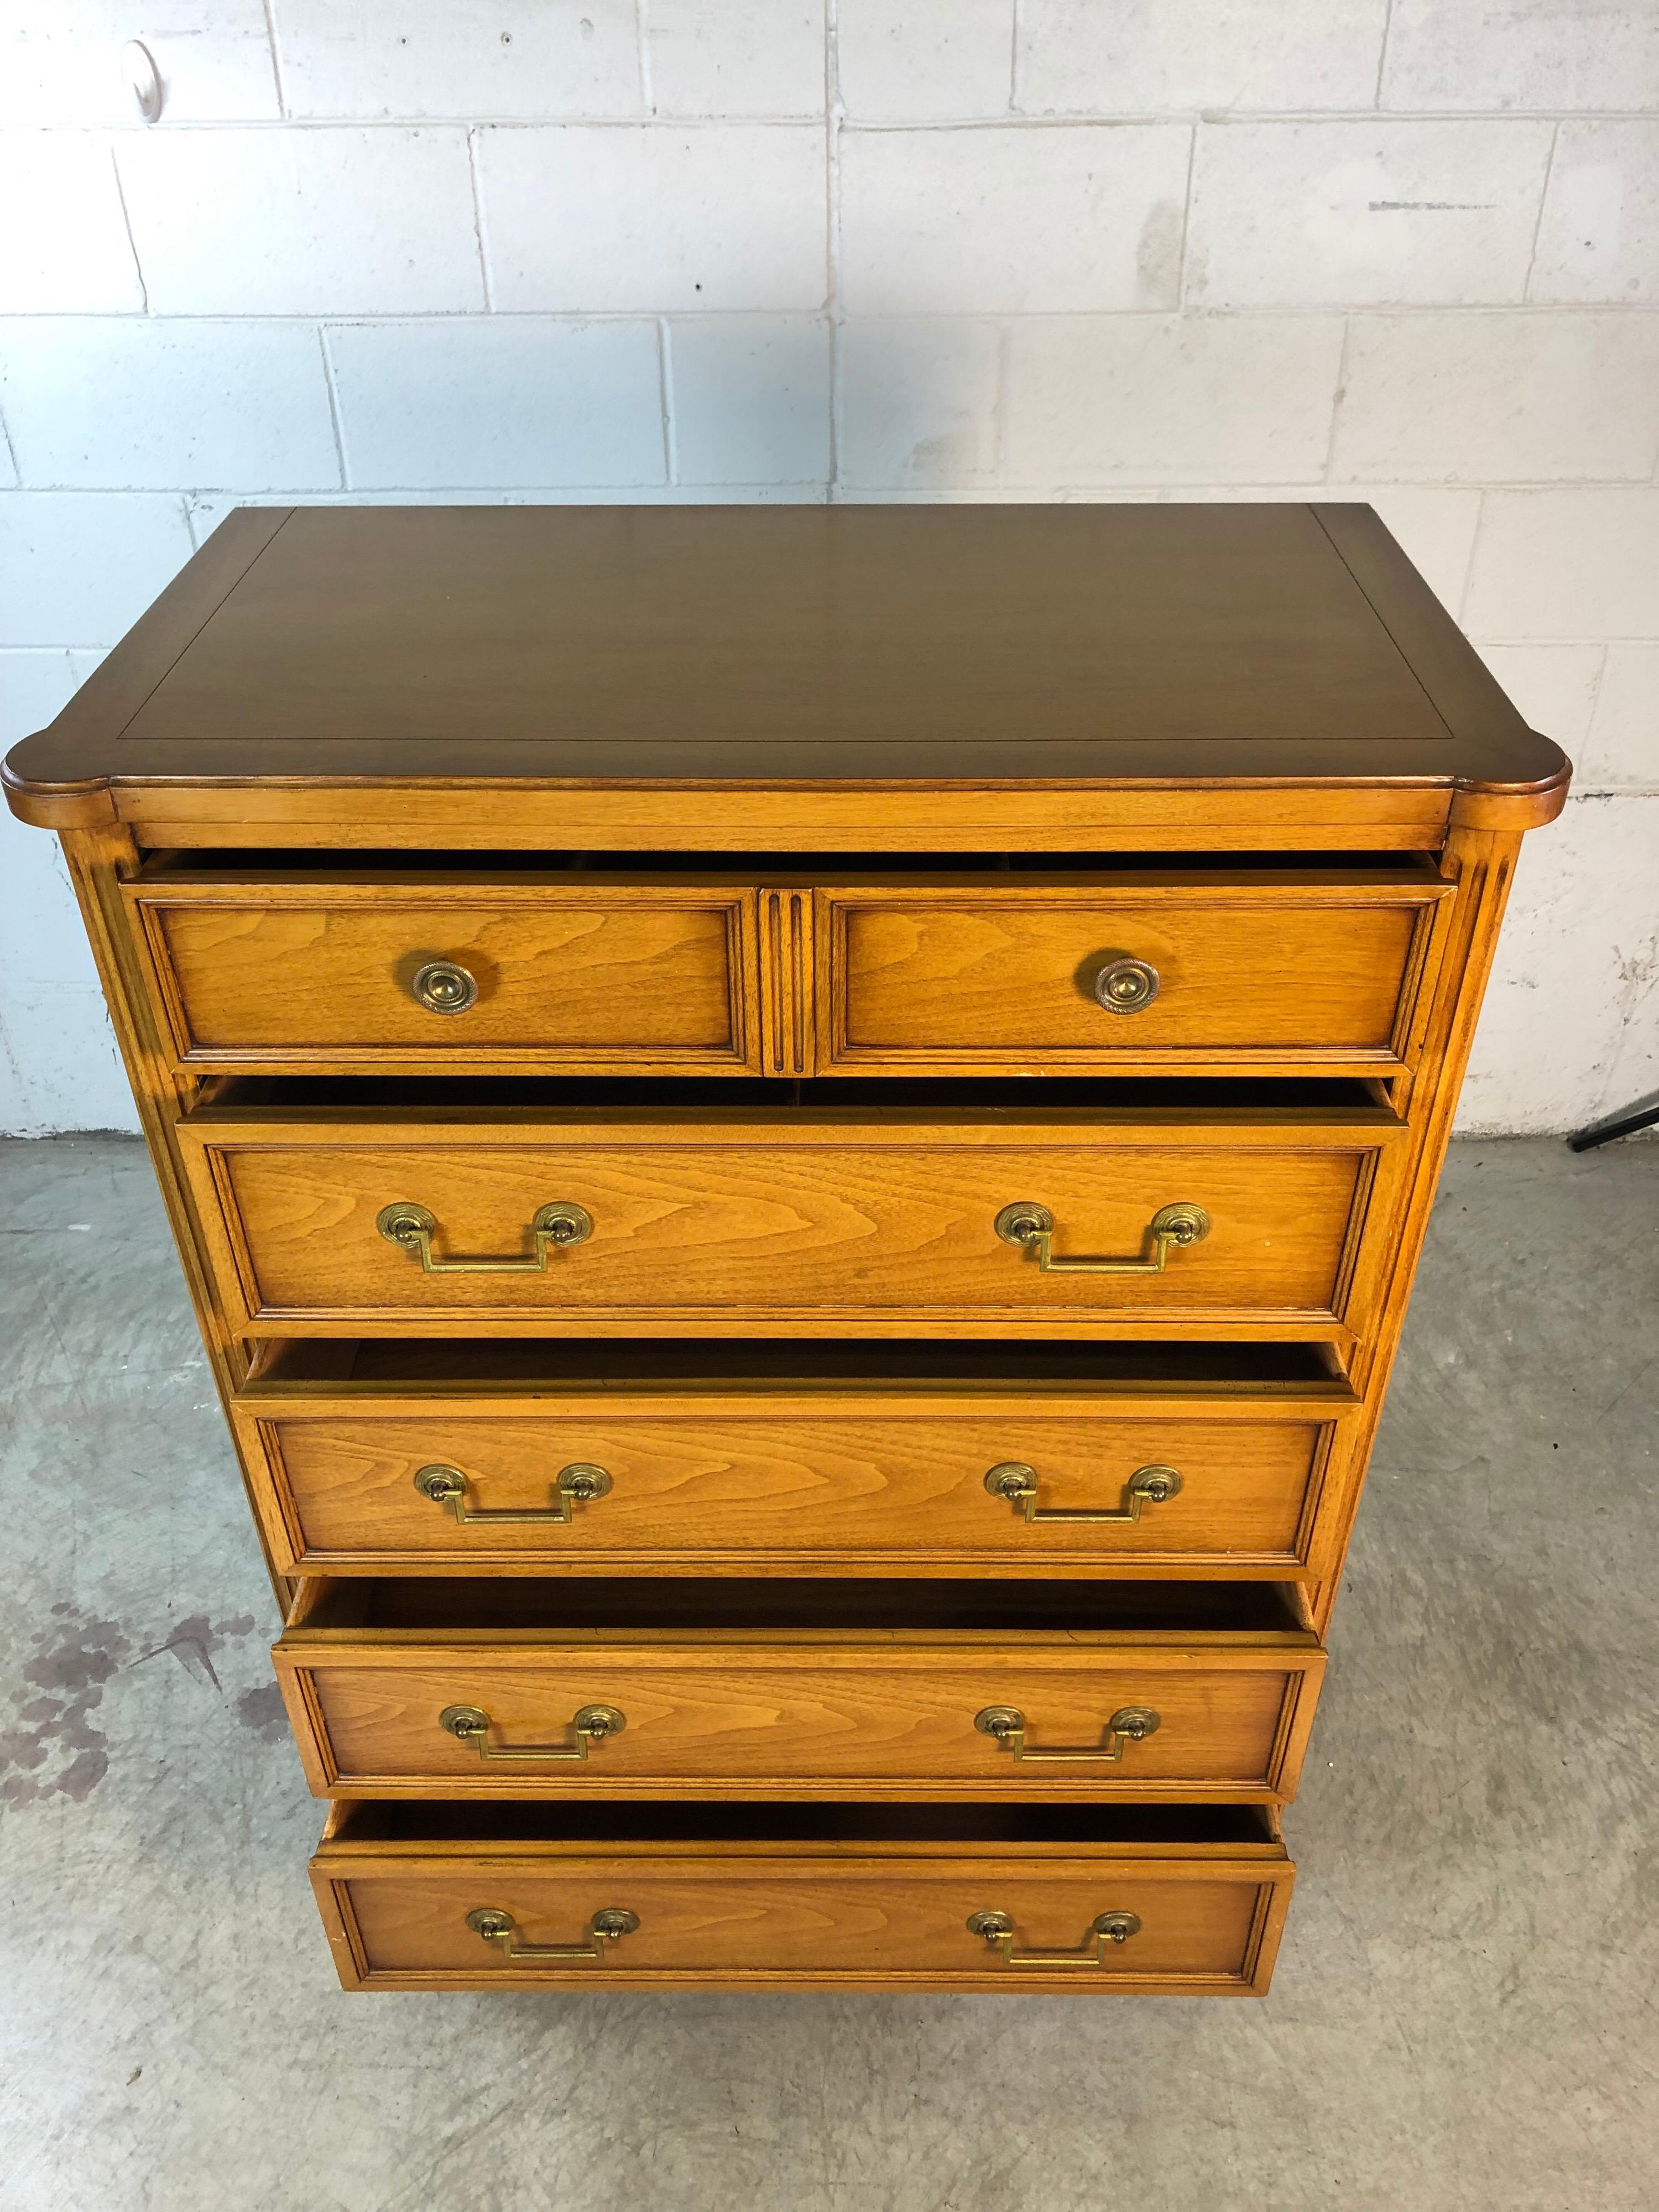 Vintage 1960s Bodart Furniture Co tall highboy Sheridan style mahogany wood dresser. The dresser has column sides and brass accents along the bottom of the columns. The dresser has five deep drawers for storage and brass pulls. Marked in the drawer.